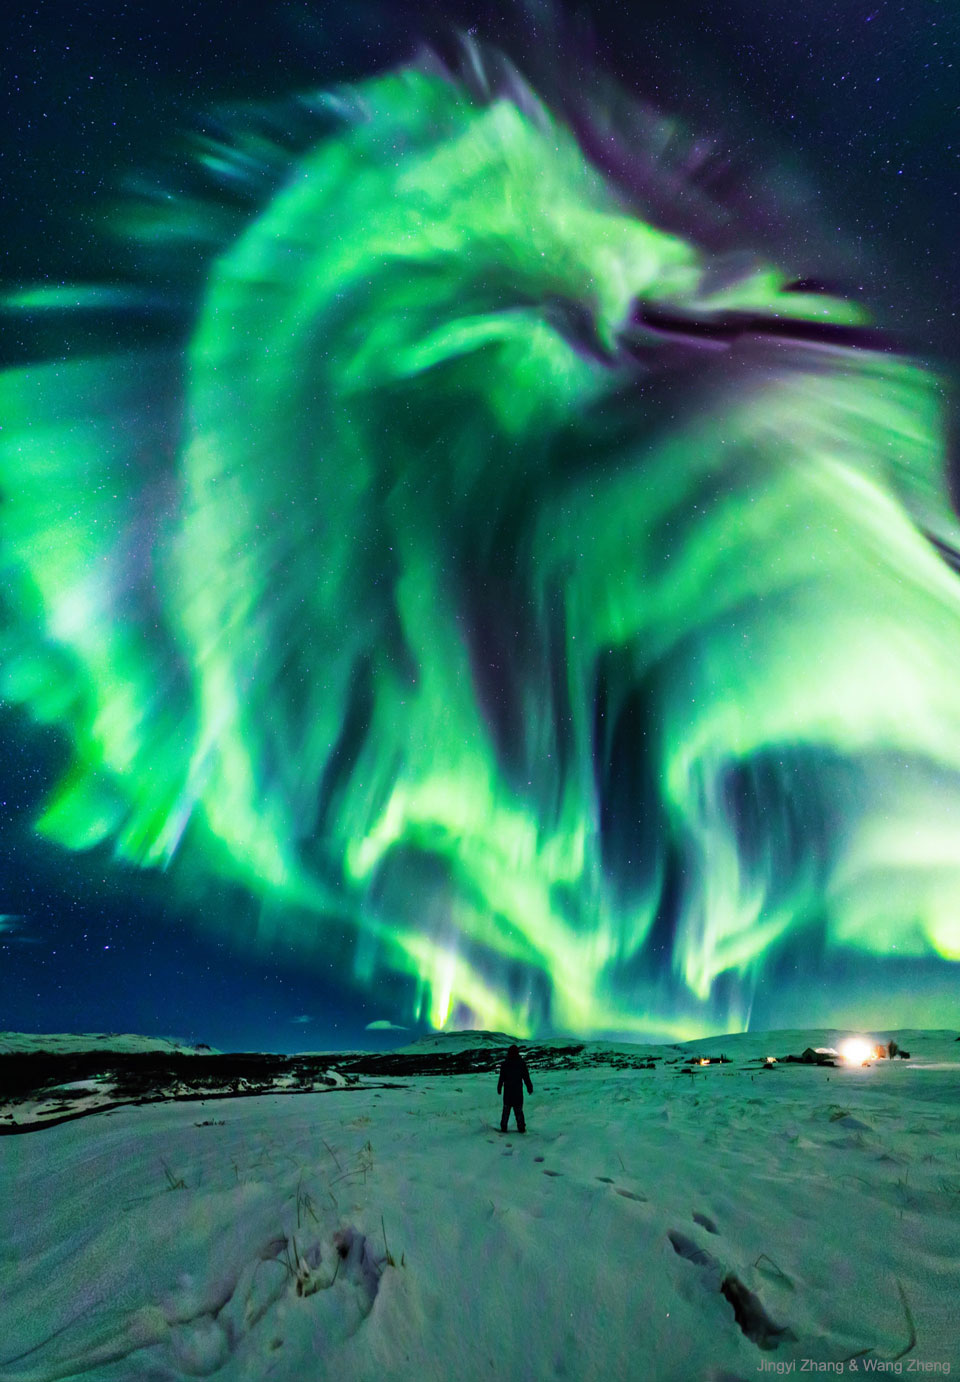 A person stands on snow and looks up at a starry sky.
In the sky is a large green aurora that resembles a dragon.
Please see the explanation for more detailed information.